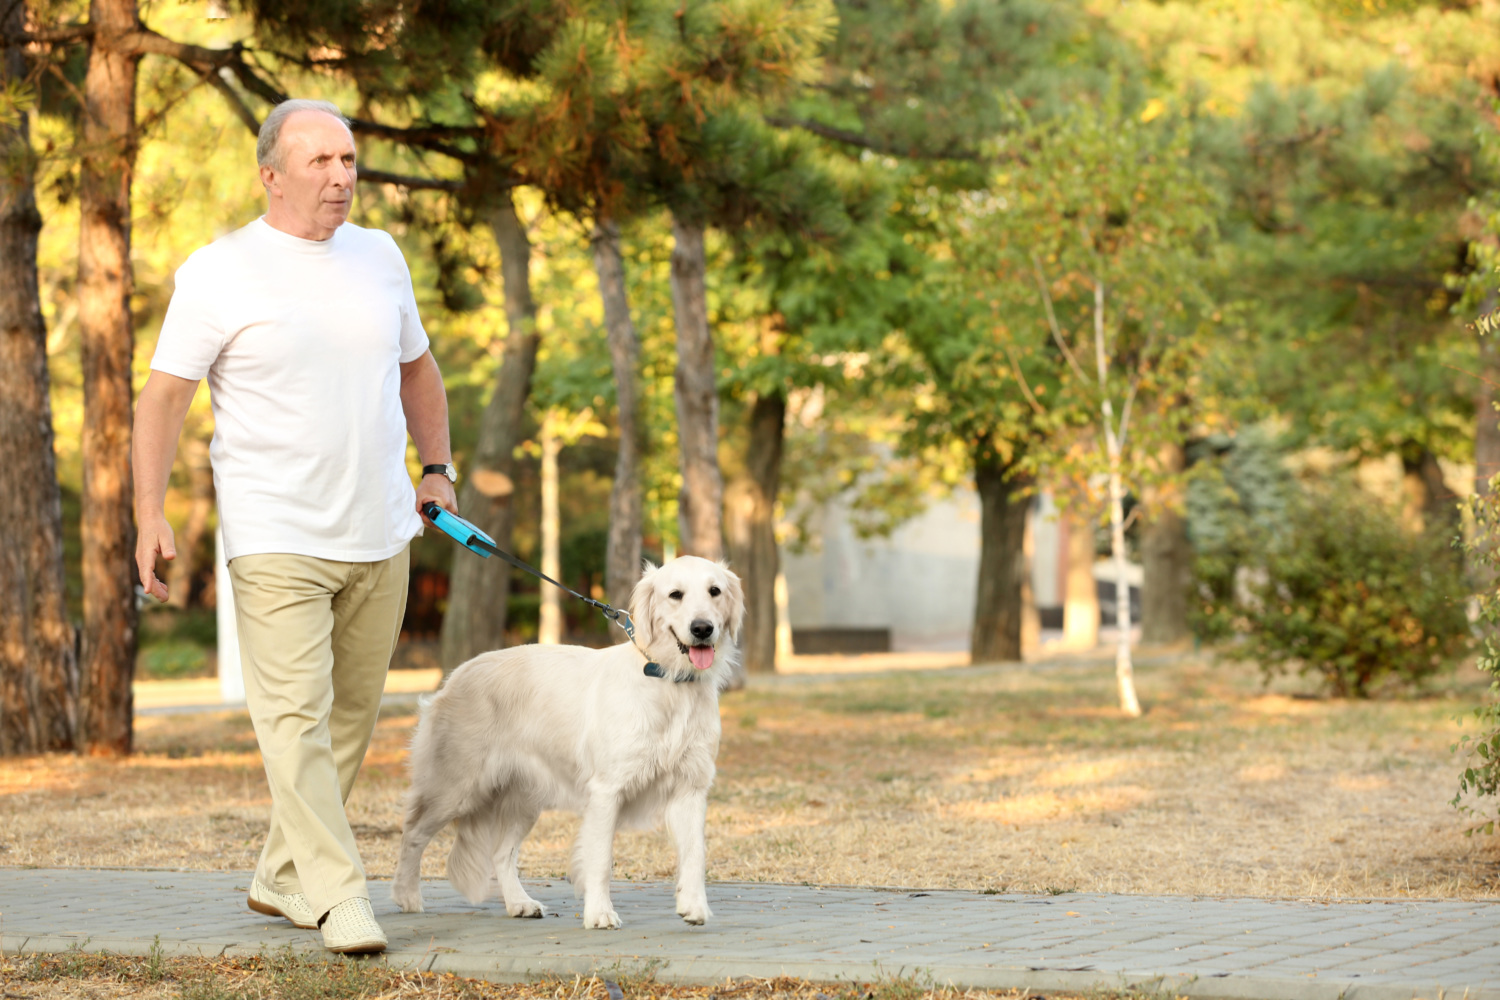 Walking Can Protect Dogs and Humans From Developing Dementia